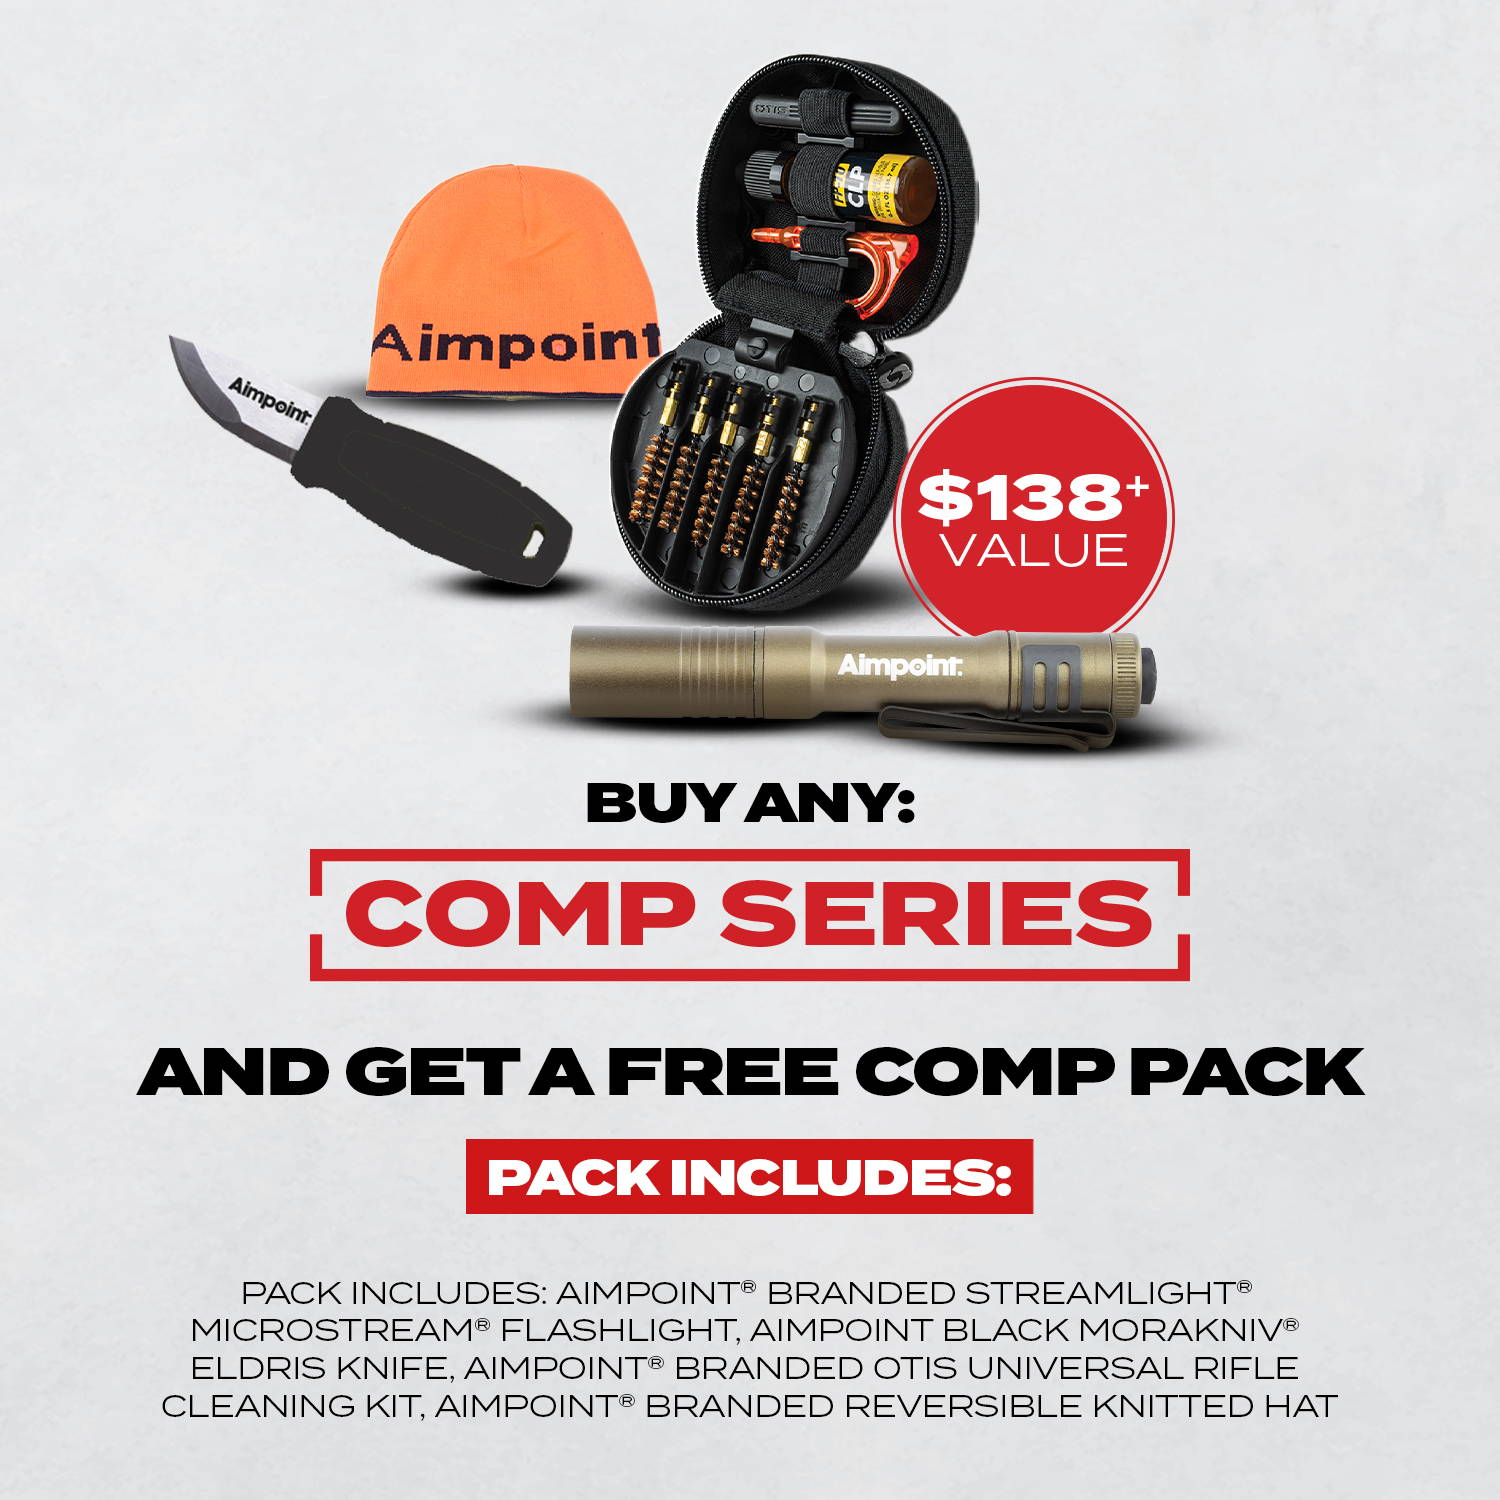 Aimpoint COMP series